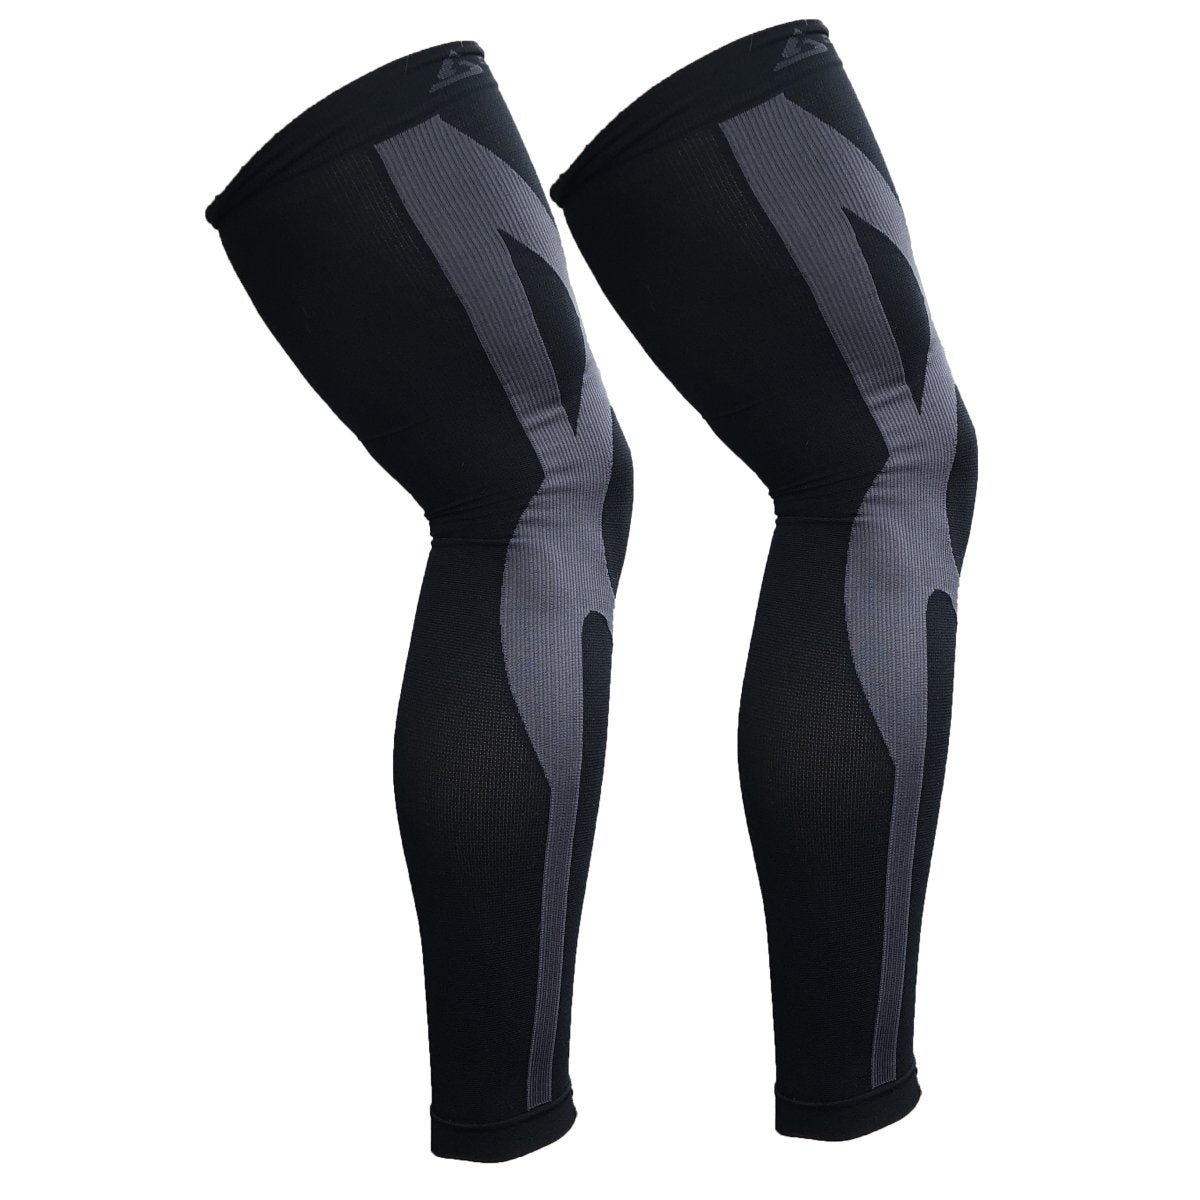 Compression Leg Sleeves - Superior Performance & Recovery